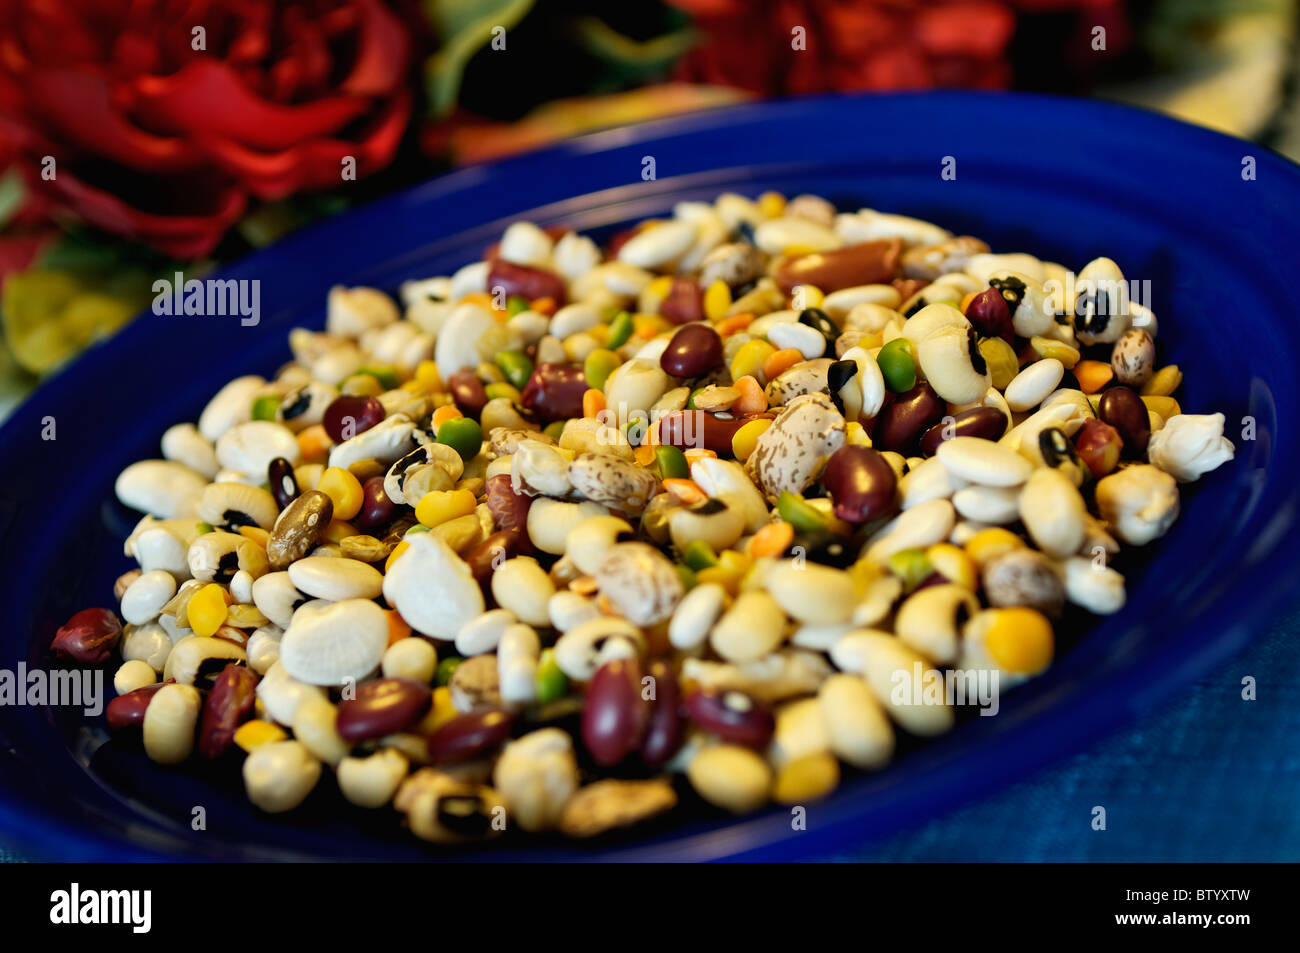 Plate of Uncooked Beans Stock Photo